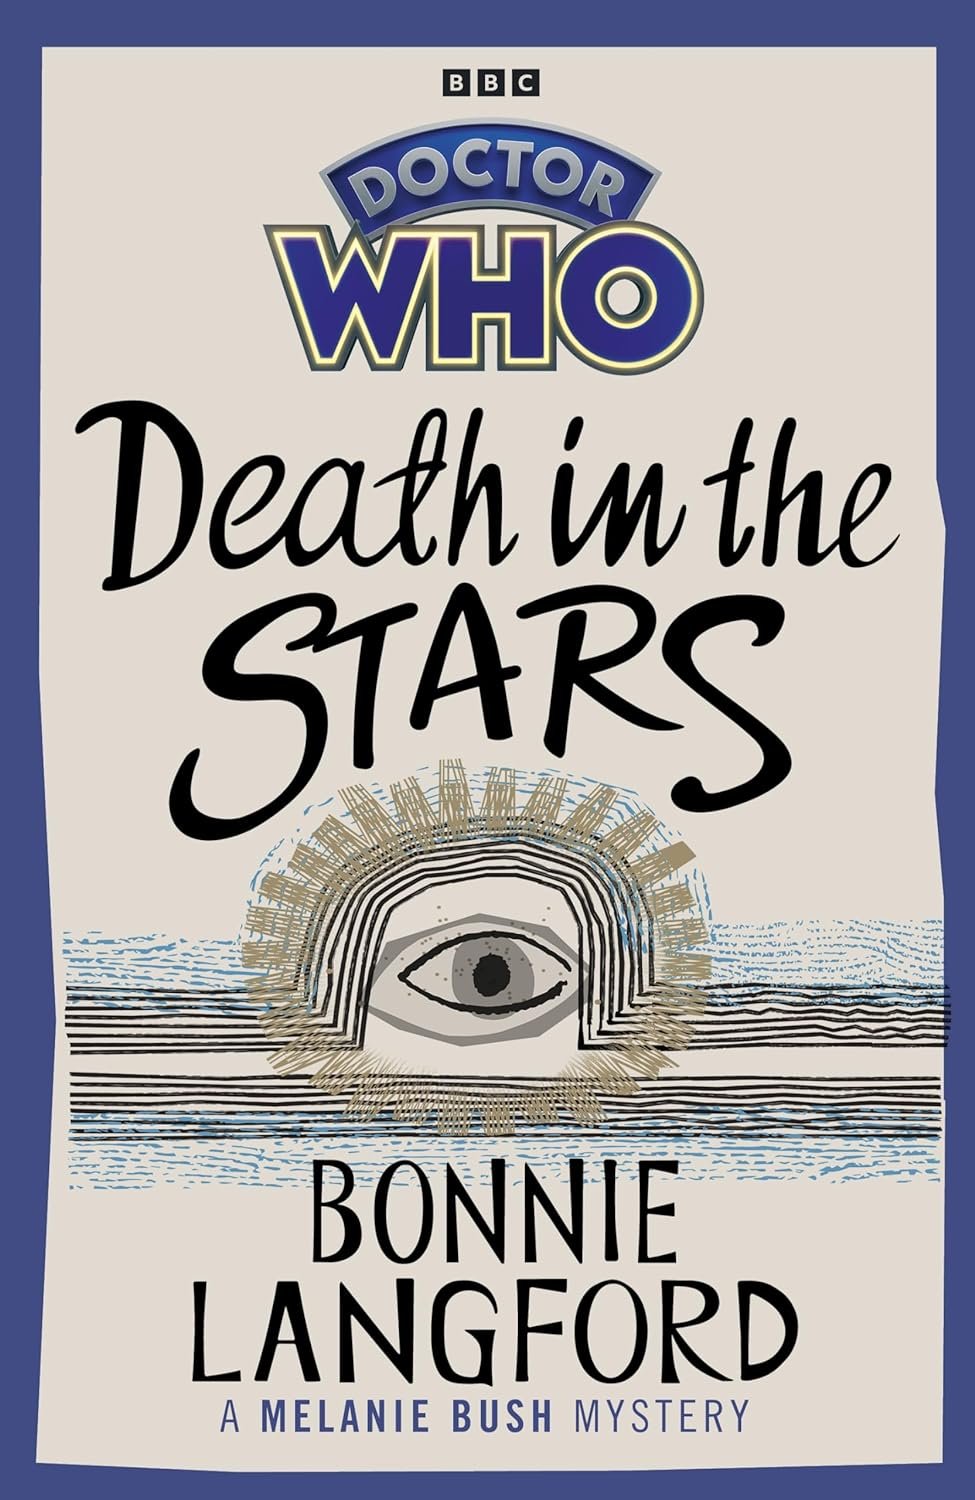 Coming Soon: Doctor Who — Death in the Stars Written by Bonnie Langford